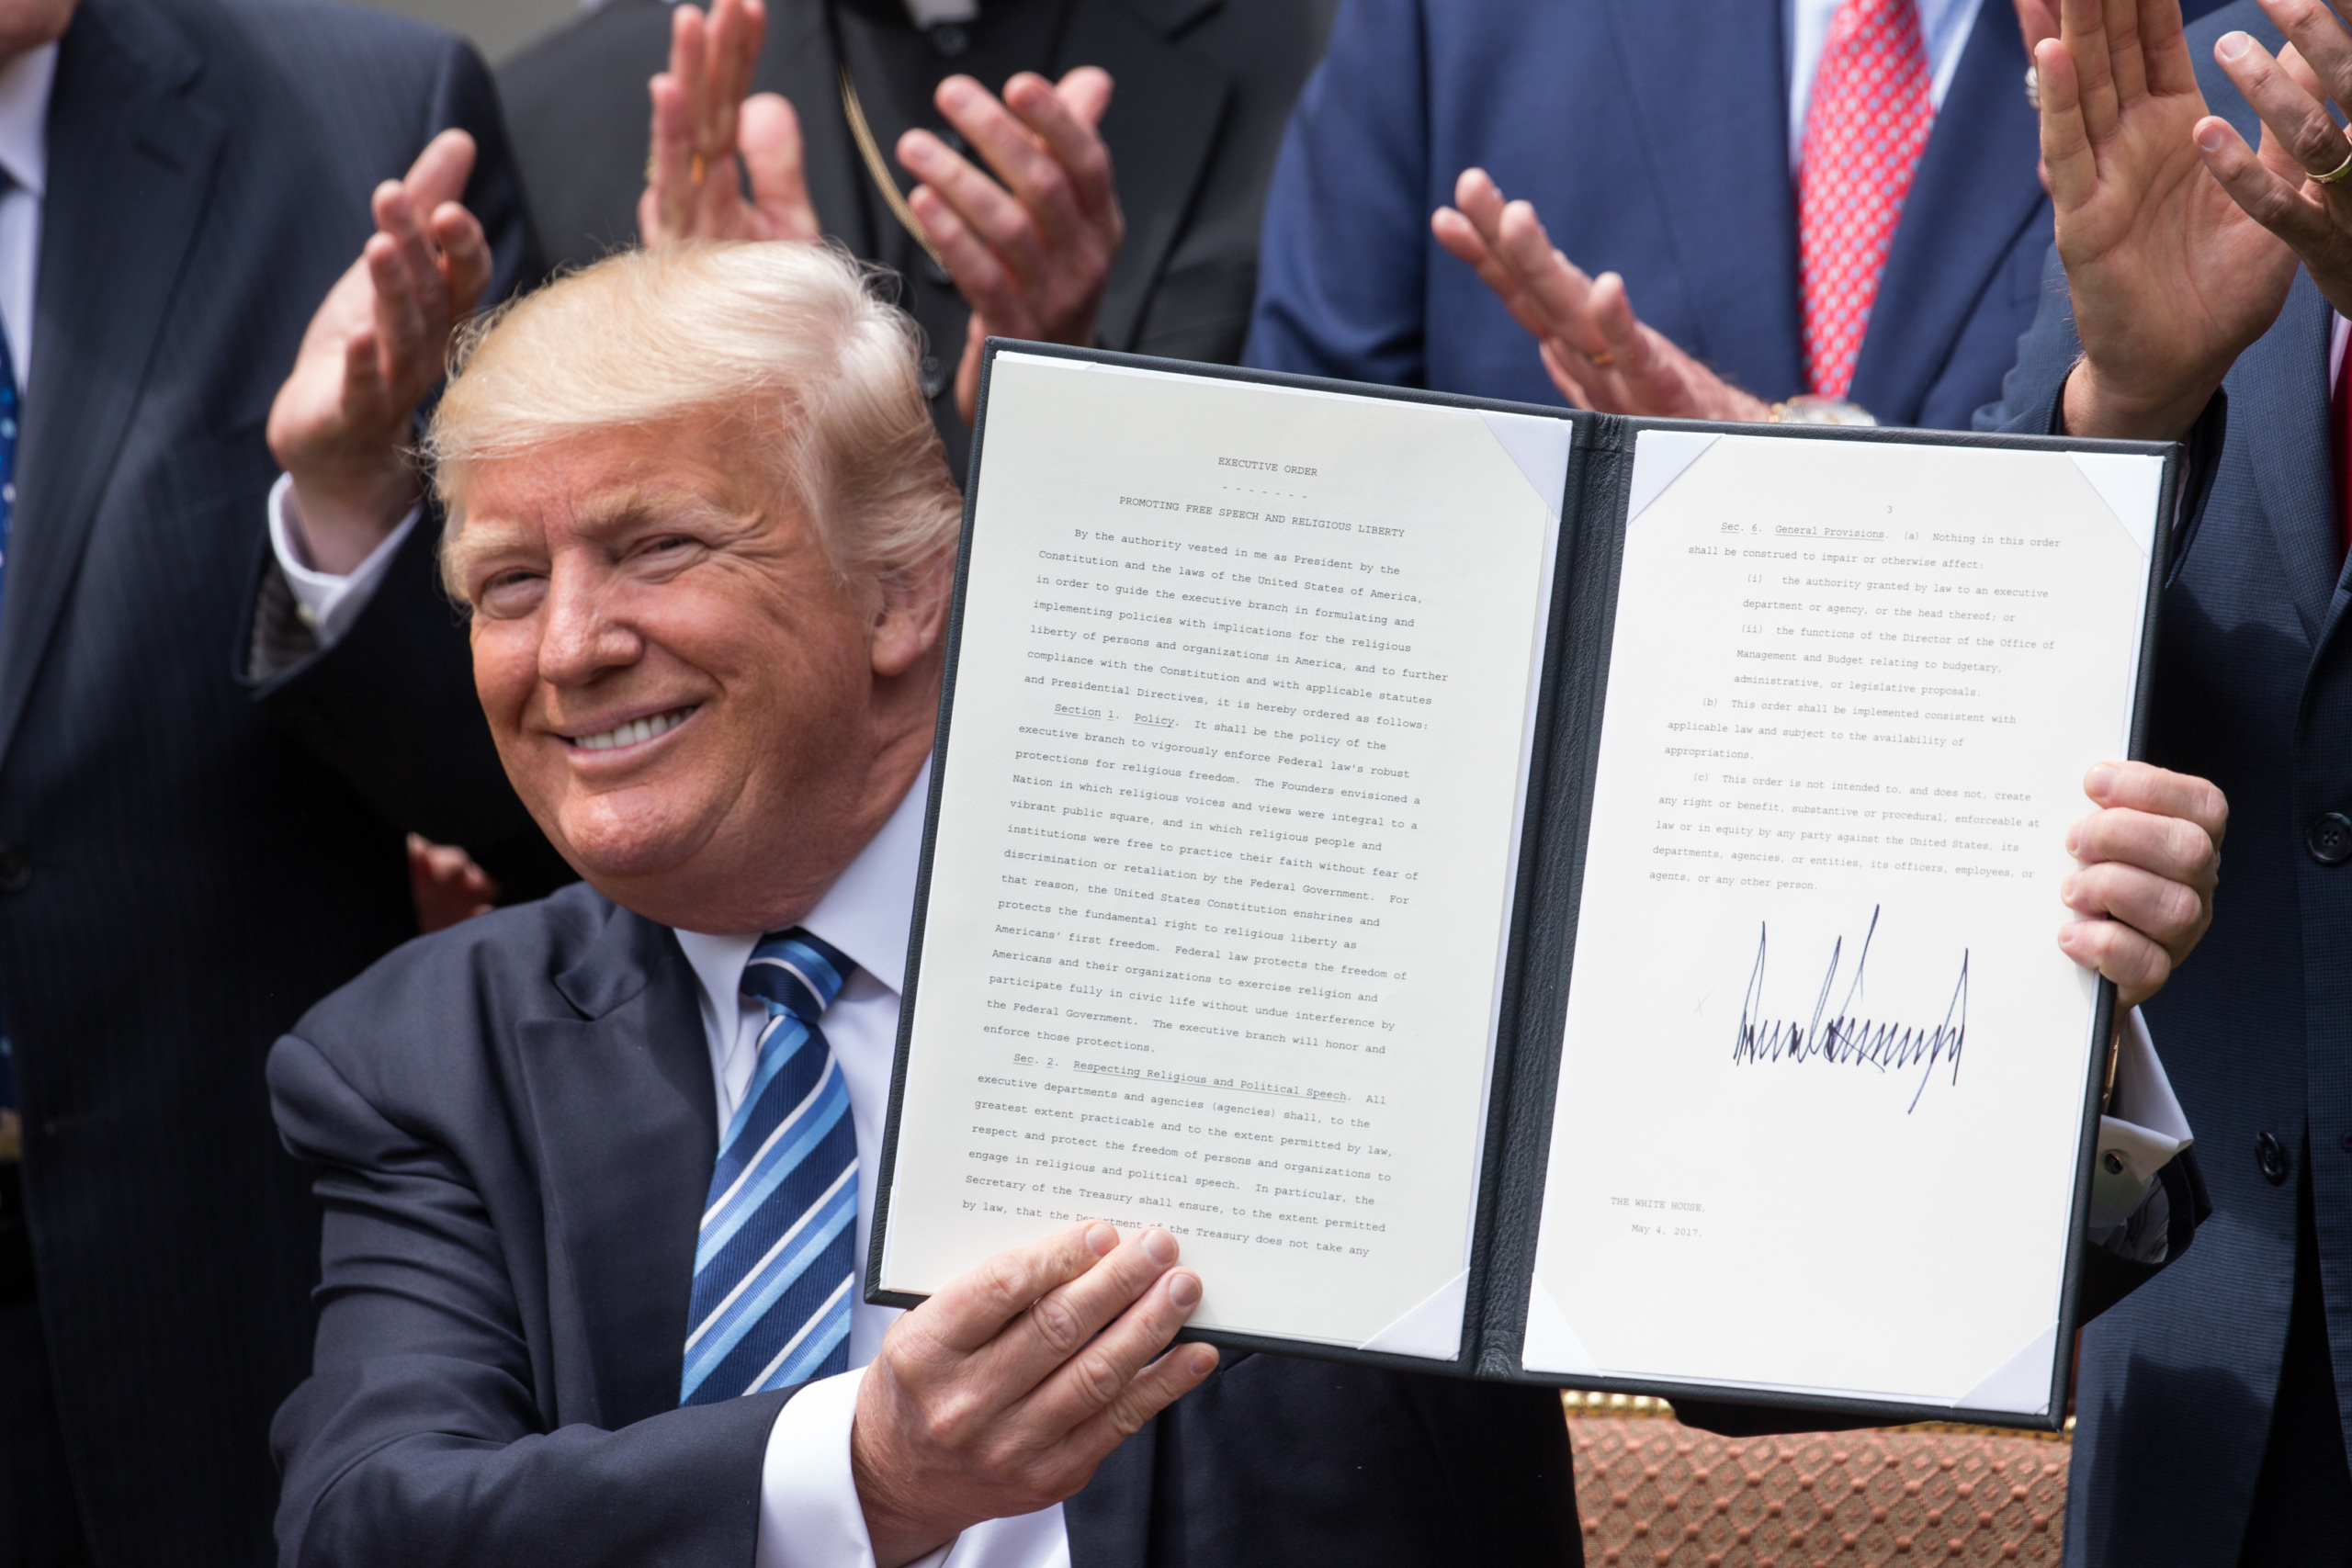 How Trump Uses “Religious Liberty” to Attack L.G.B.T. Rights